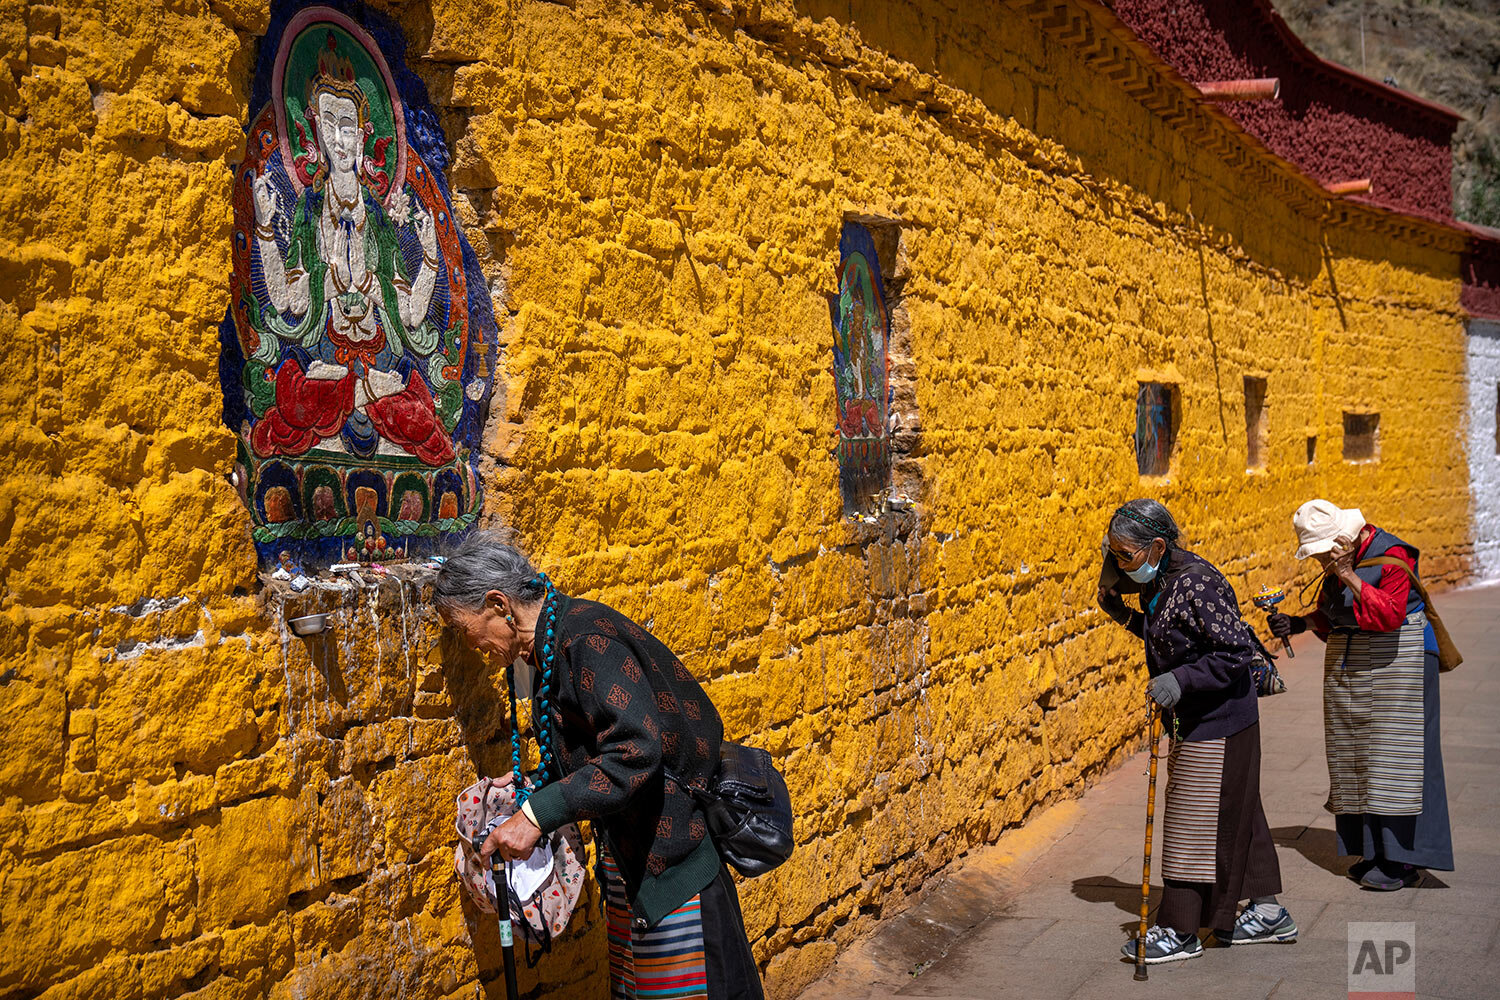  Members of the Buddhist faithful pray outside the Potala Palace in Lhasa in western China's Tibet Autonomous Region, as seen during a government organized visit for foreign journalists, Tuesday, June 1, 2021. (AP Photo/Mark Schiefelbein) 